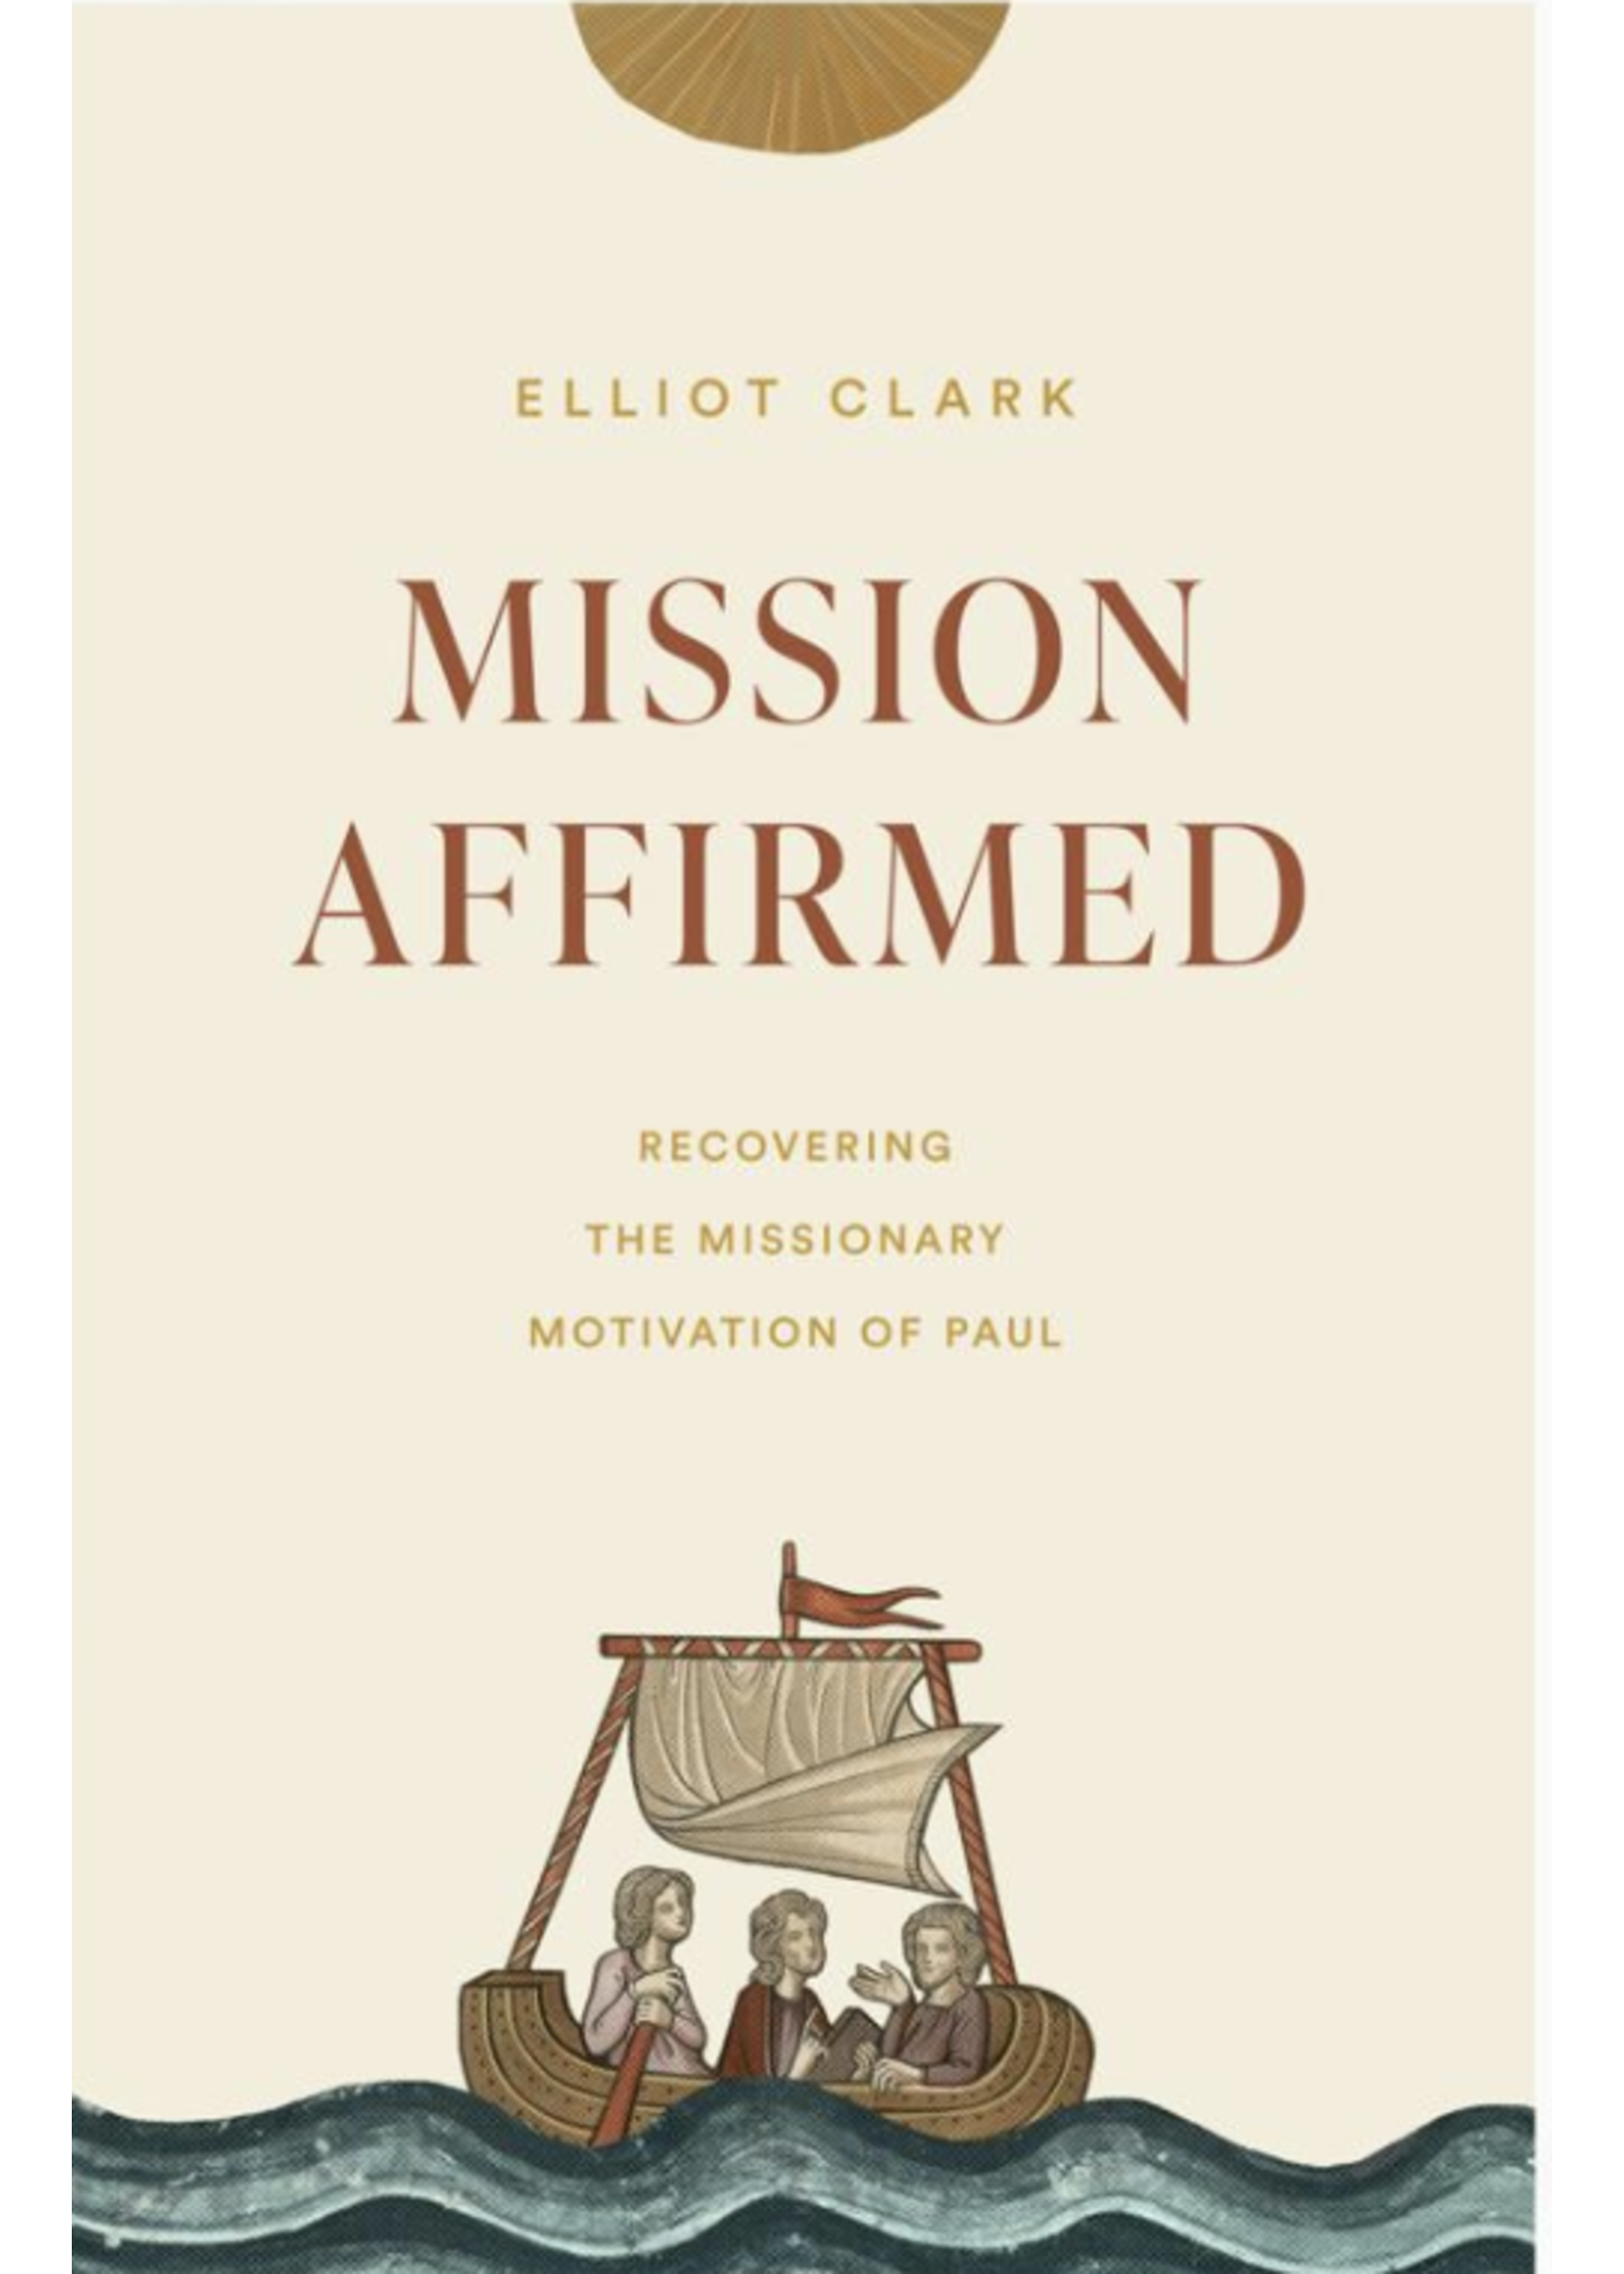 Mission Affirmed: Recovering the Missionary Motivation of Paul [Elliot Clark]